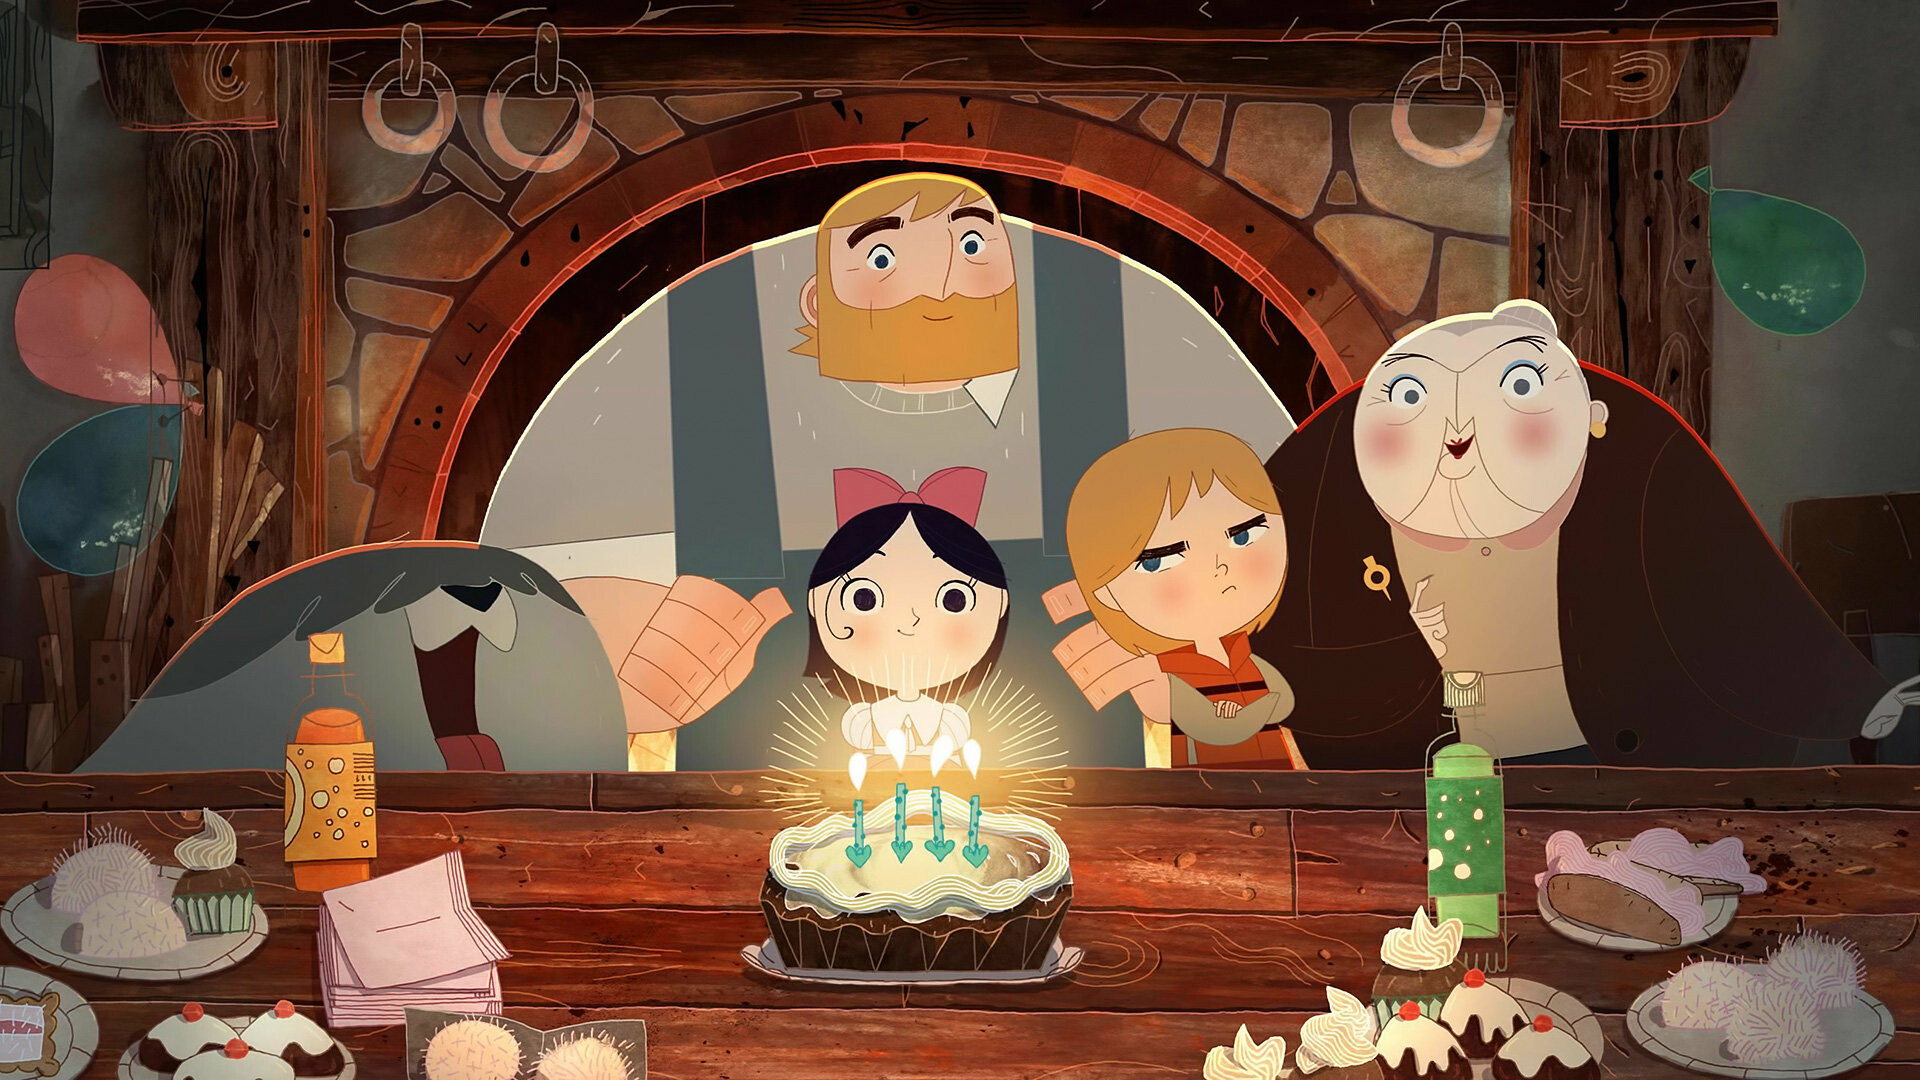 Song of the Sea: Hand-drawn animated adventure about Irish myths and legends. 1920x1080 Full HD Background.